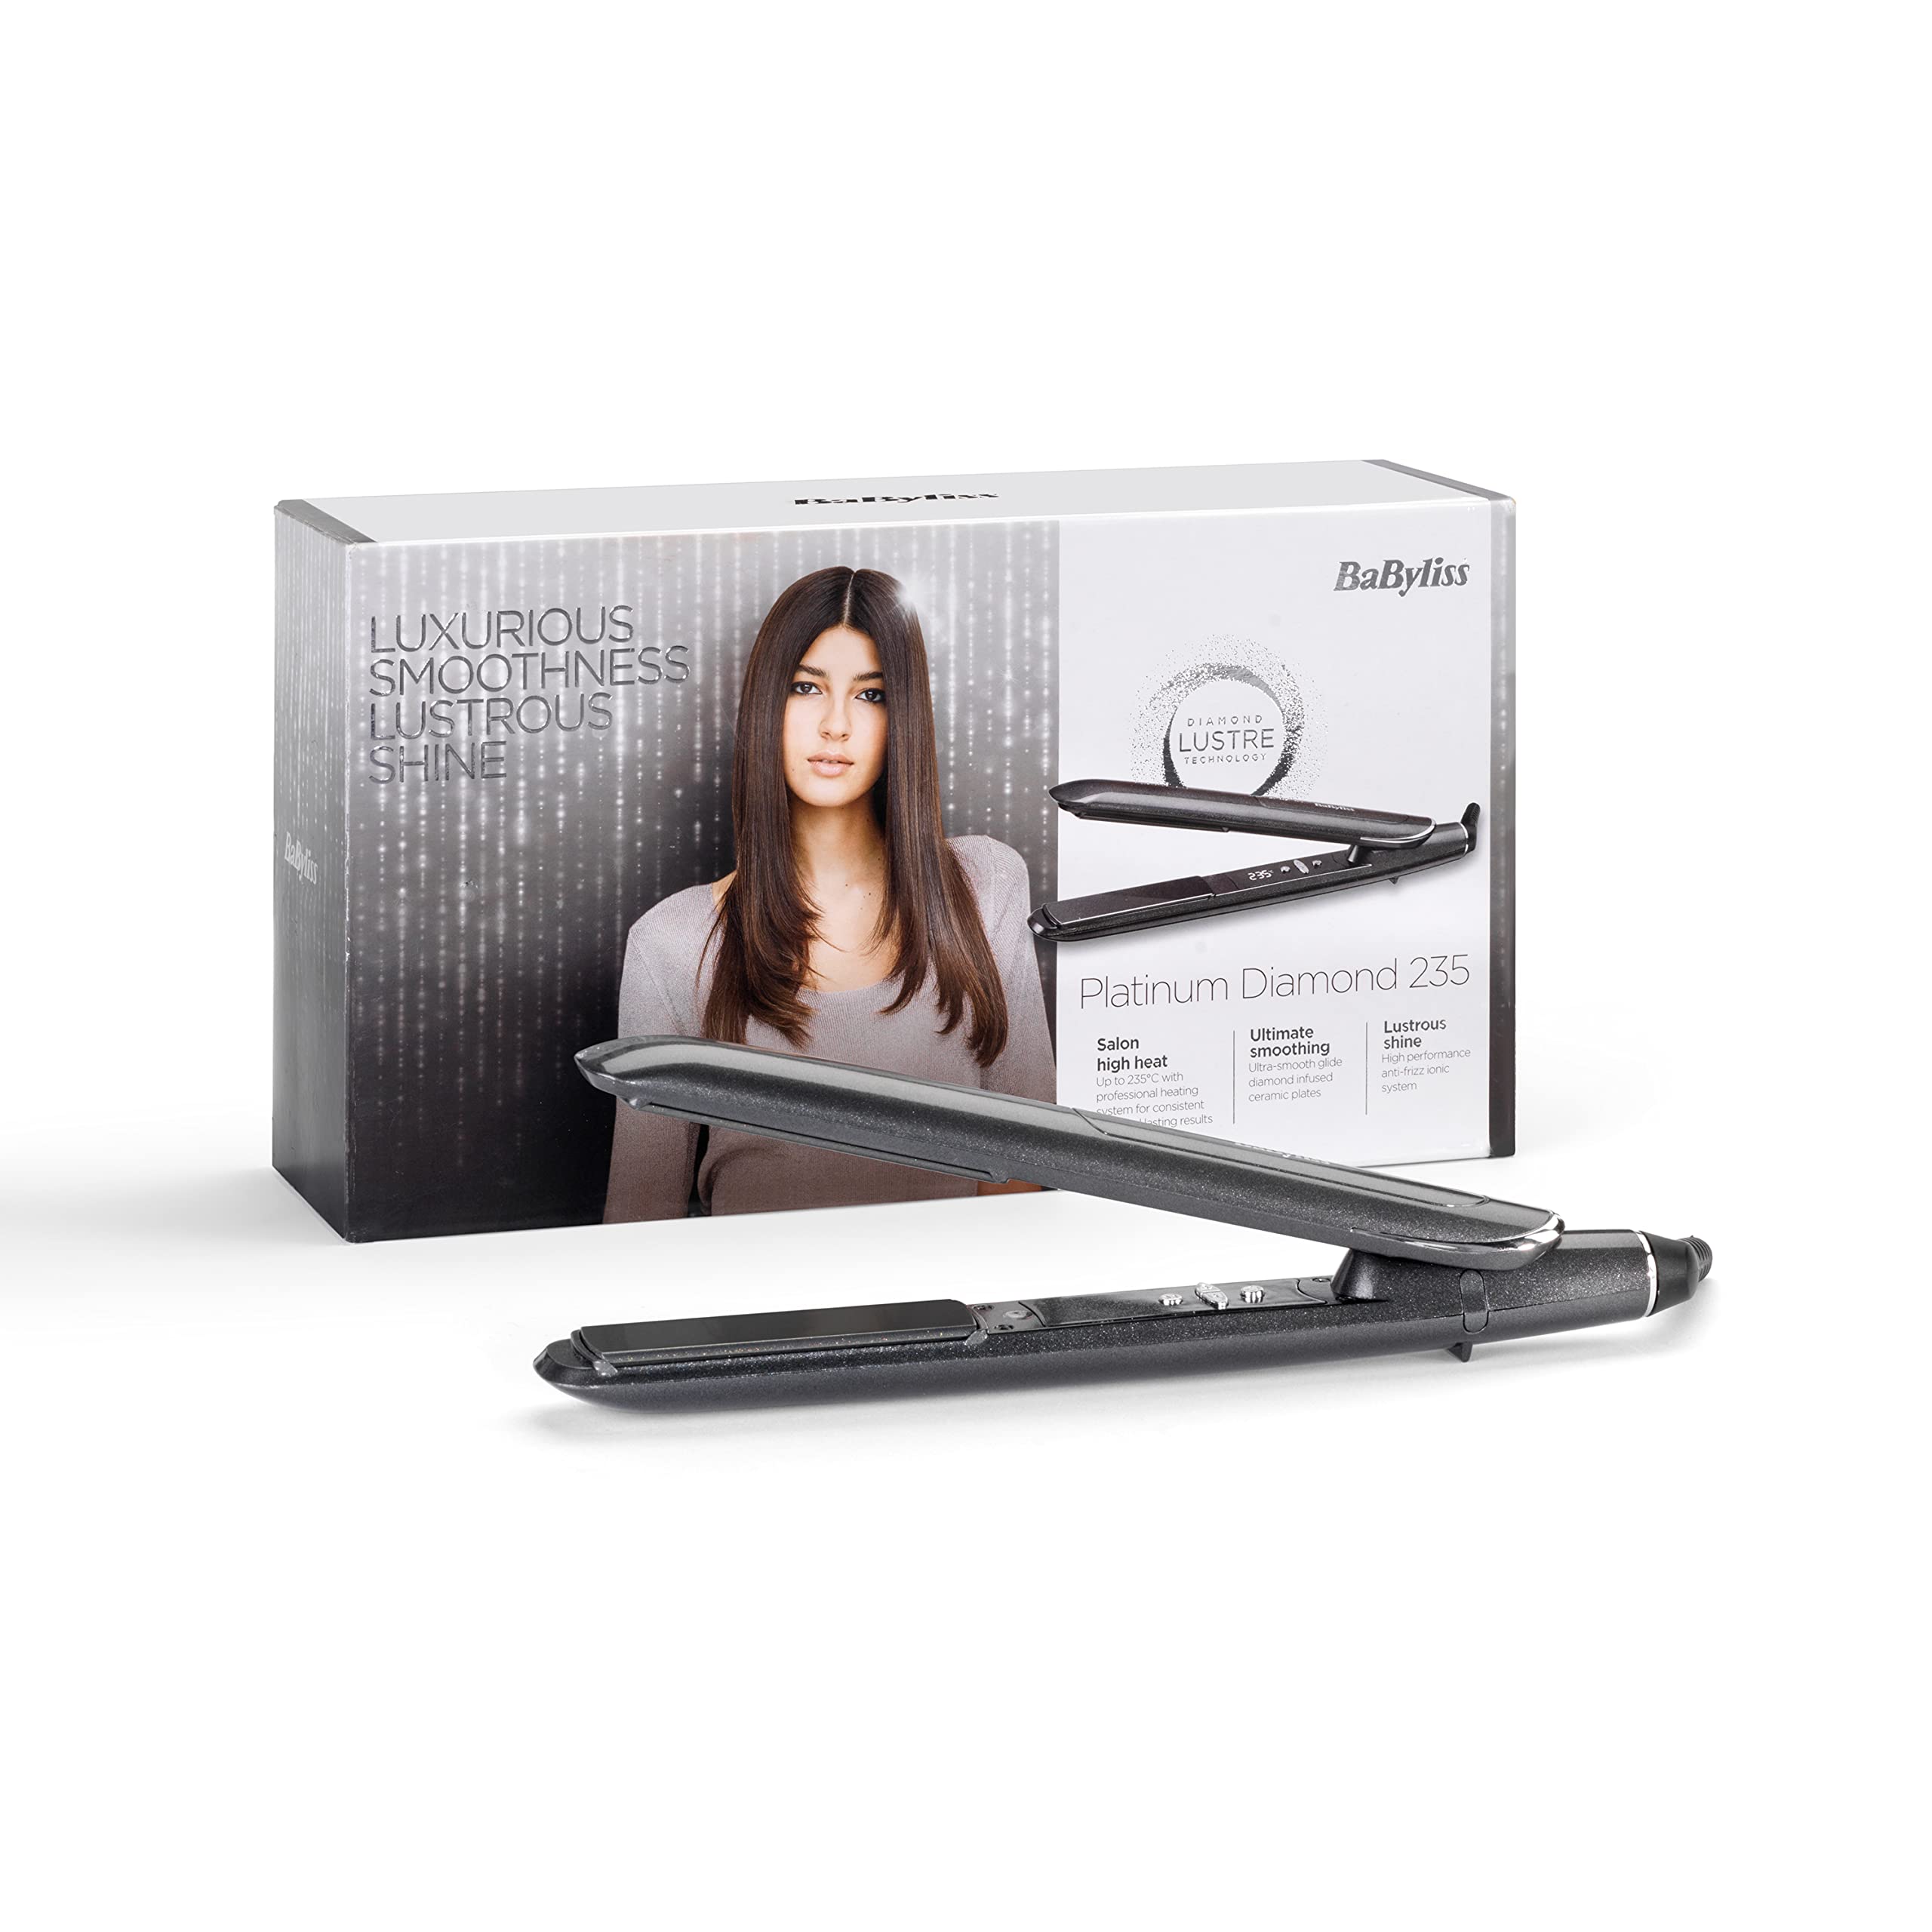 BaByliss Platinum Diamond Infused Hair Straightener | Smooth & Rapid Styling With 24mm Elongated Ceramic Plates | 10 Heat Settings Up to 235°C | Ionic Frizz Control & Auto Shut Off